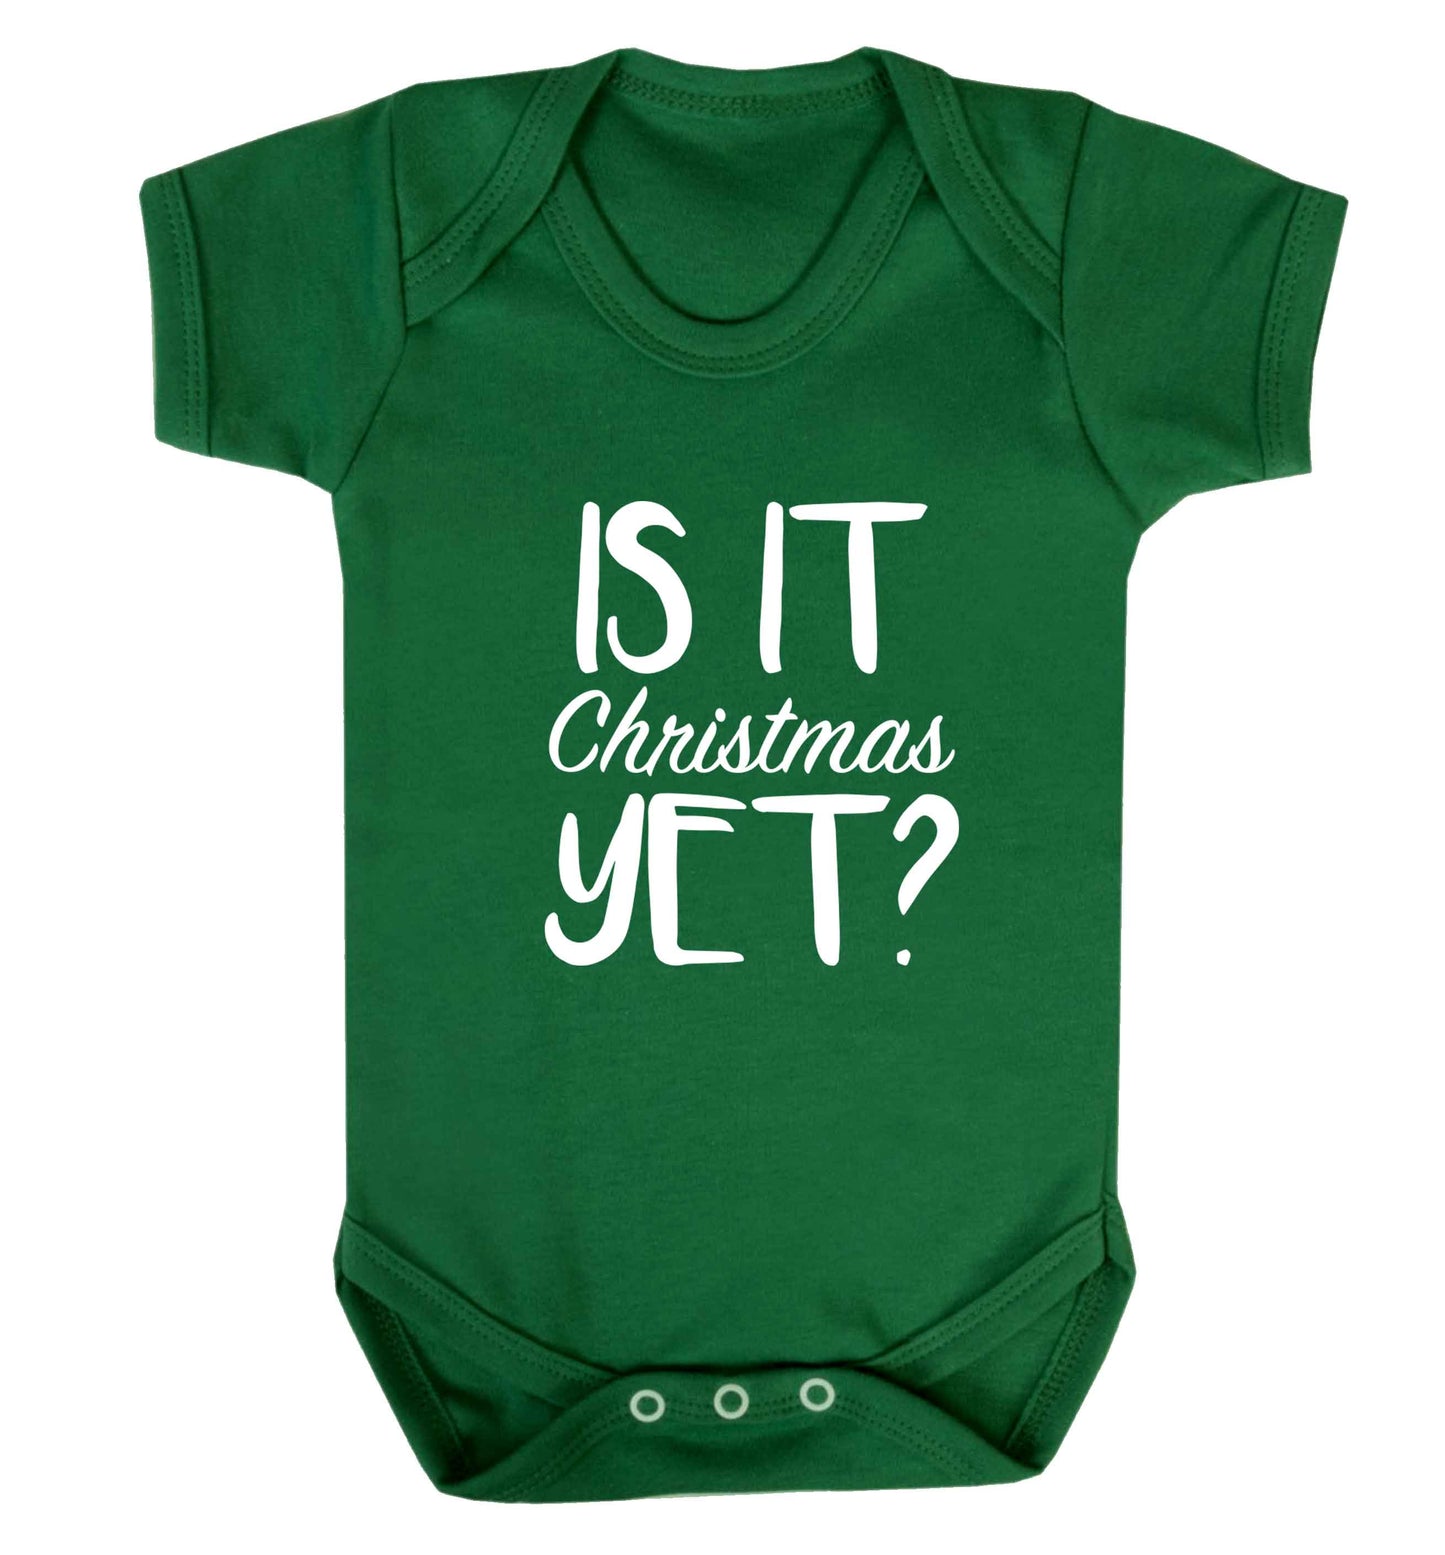 Is it Christmas yet? baby vest green 18-24 months